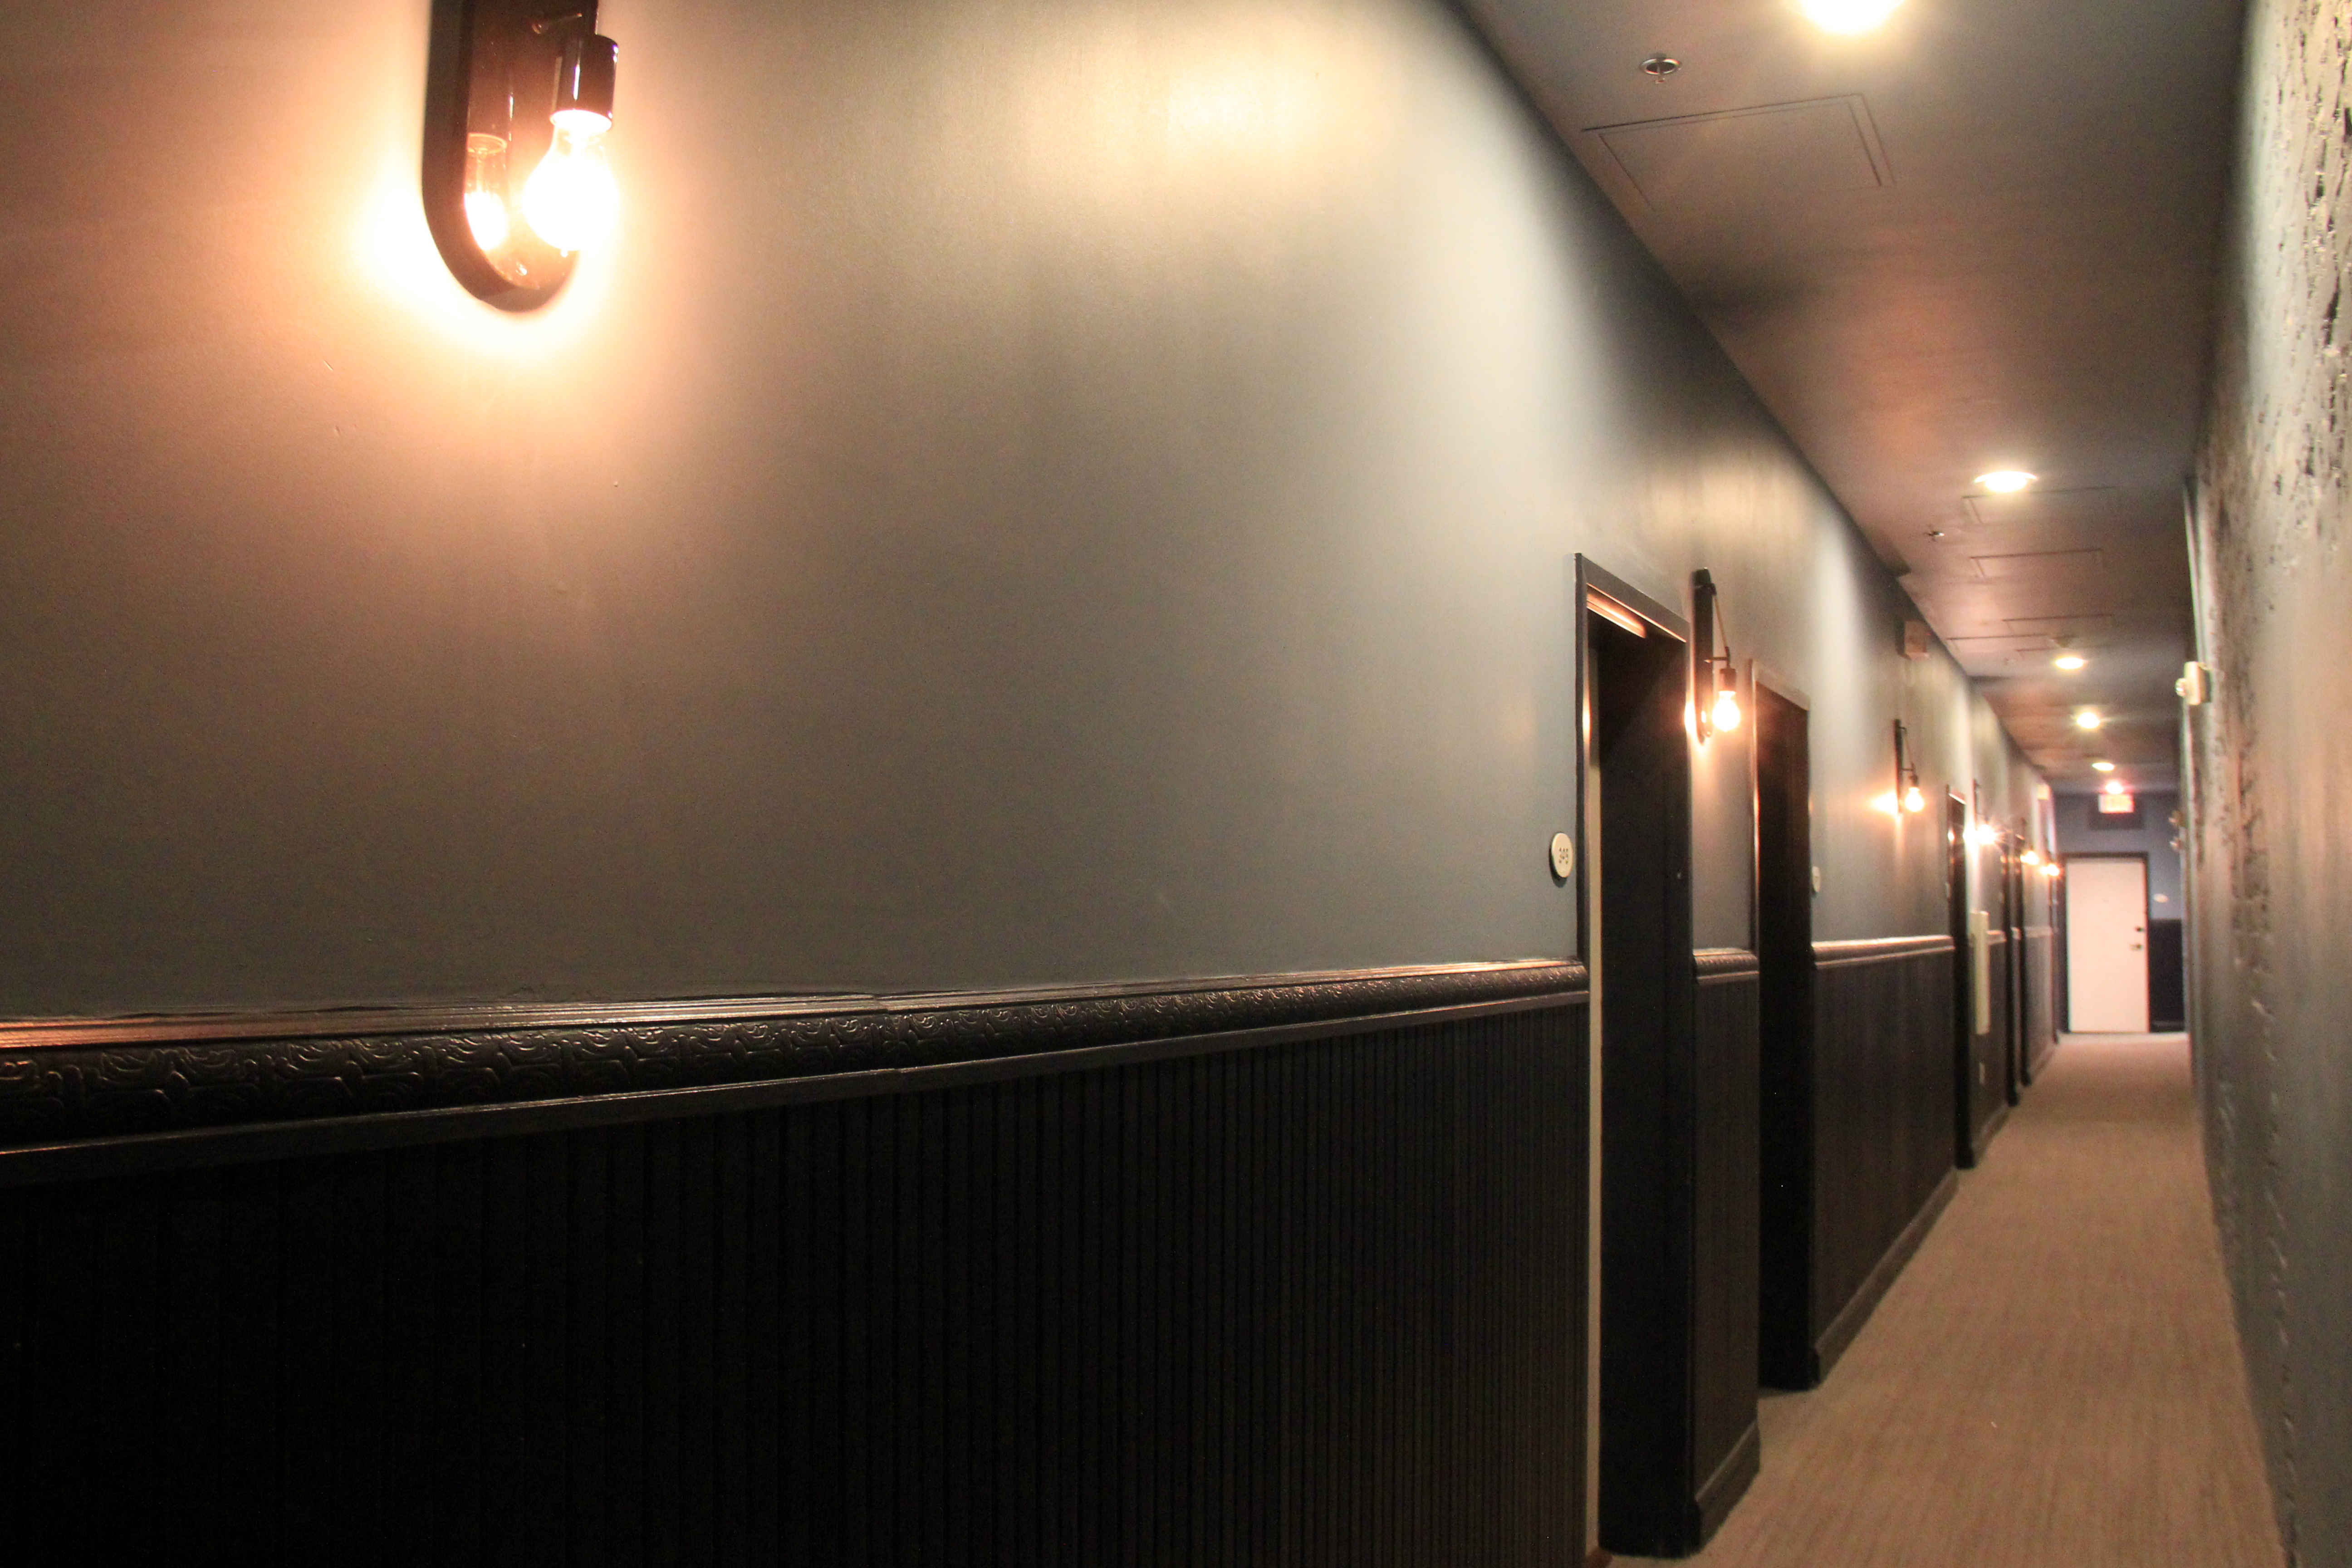 3rd Floor Hallway at Old 77 Hotel and Chandlery